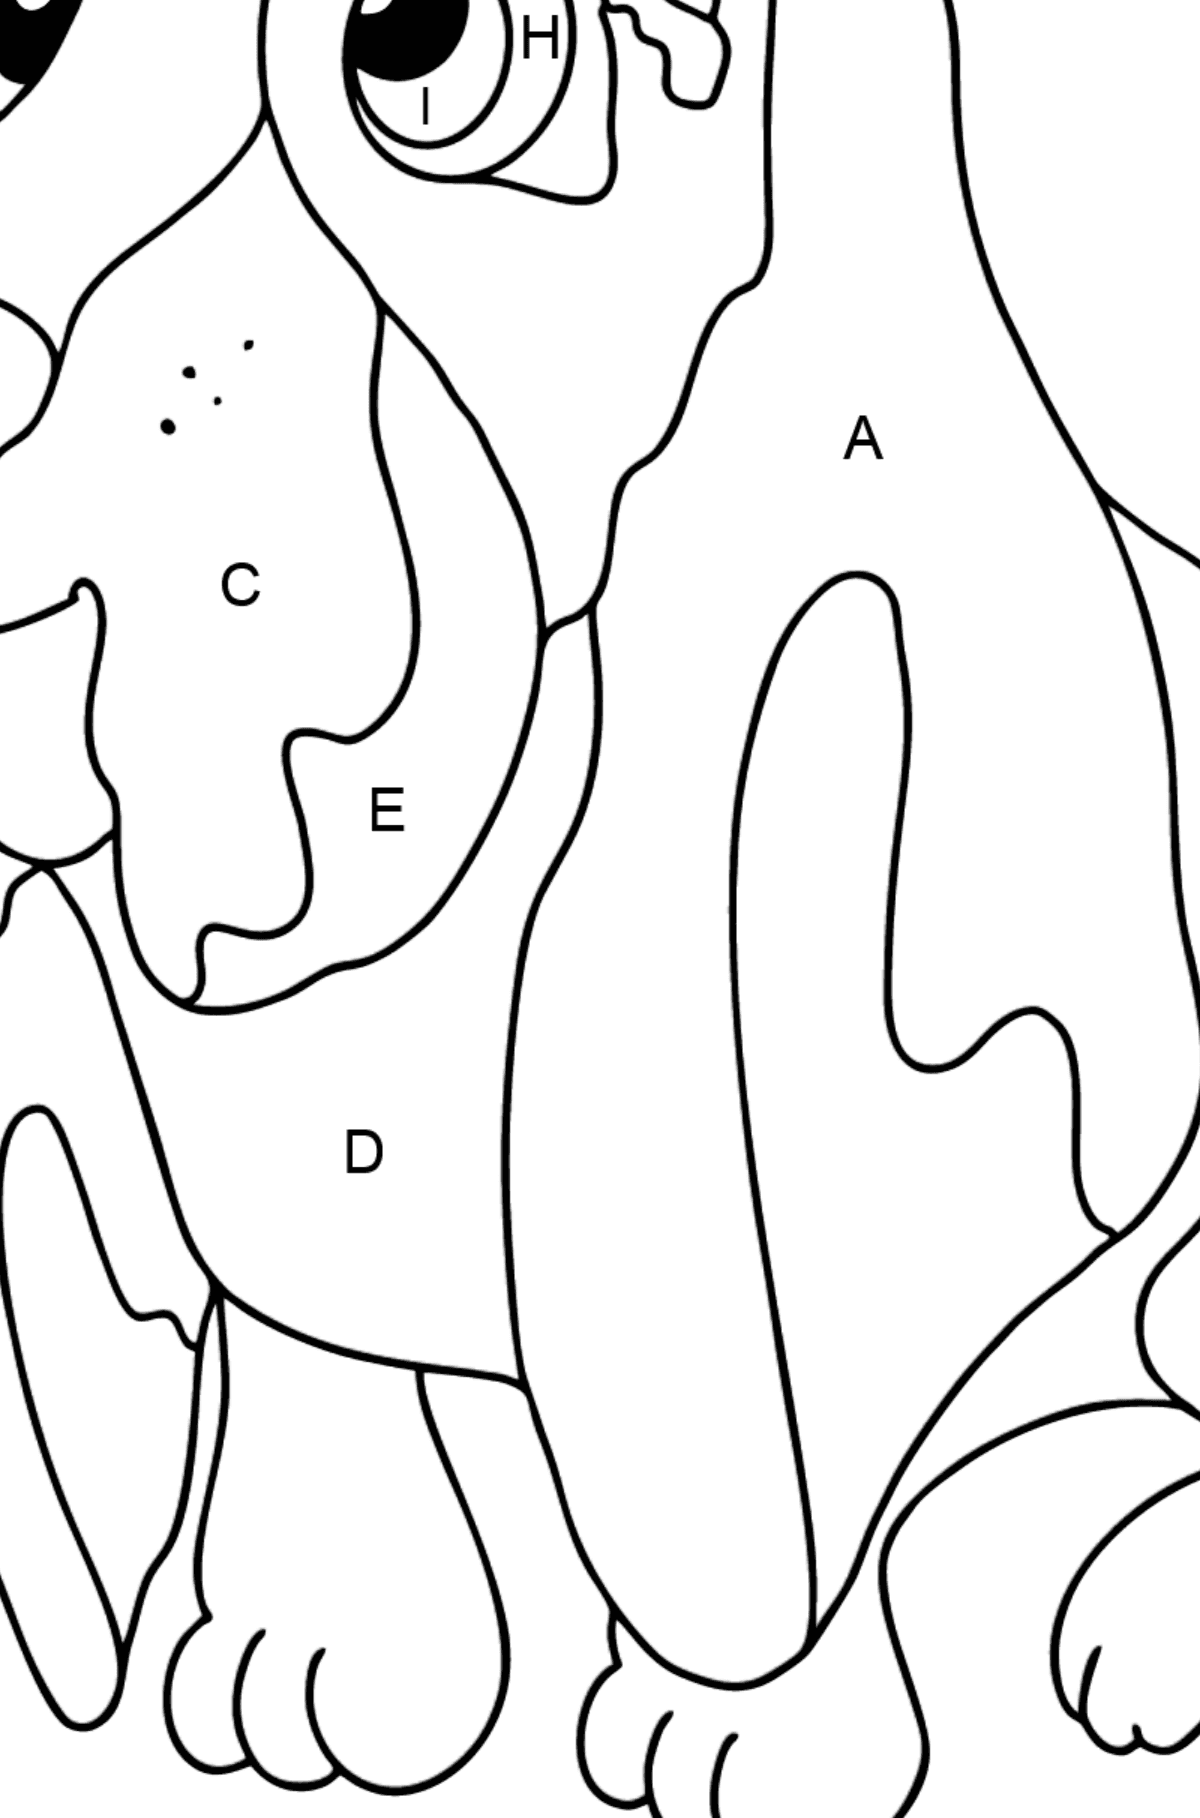 Coloring Page - A Dog is Sitting near a Bone - Coloring by Letters for Kids